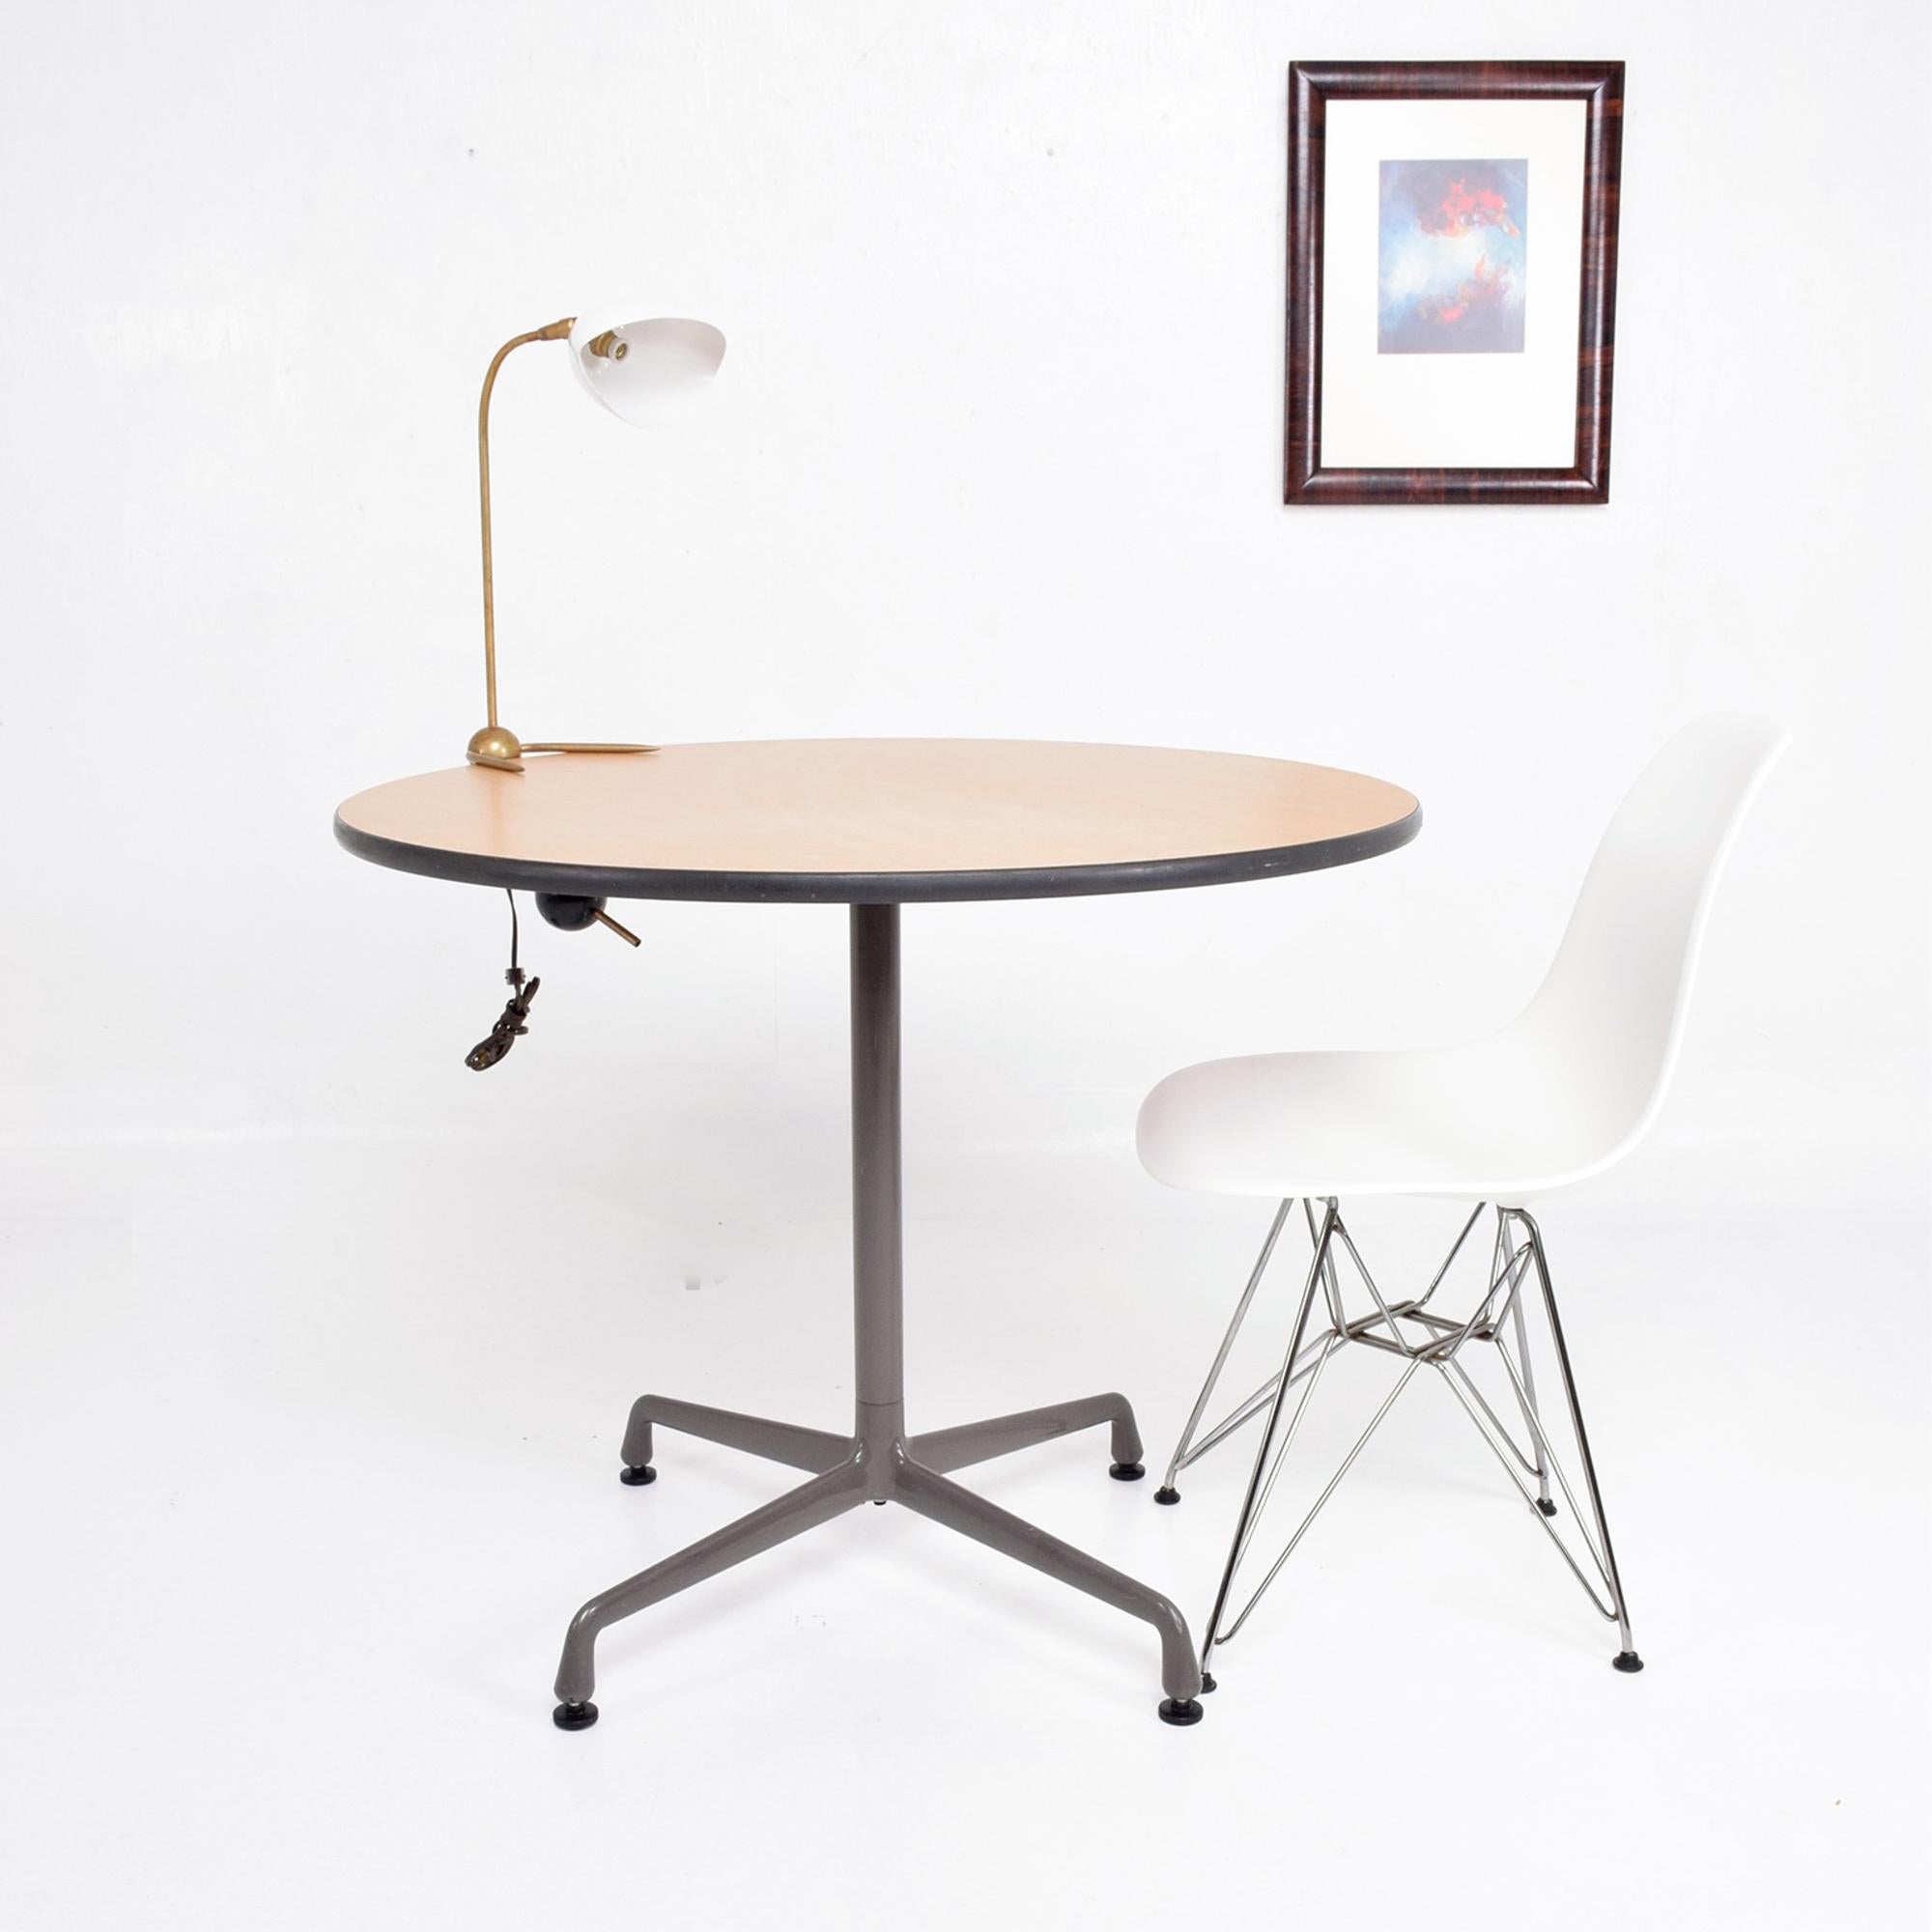 Table
Herman Miller Aluminum Group Small Round Office Table 
Manufacturer Herman Miller Charles & Ray Eames designer.
With label.
Made in Aluminum and Formica. circa 1960s
Four Star Base with Round Top
29.25 tall x 35.75 in diameter.
Wear consistent